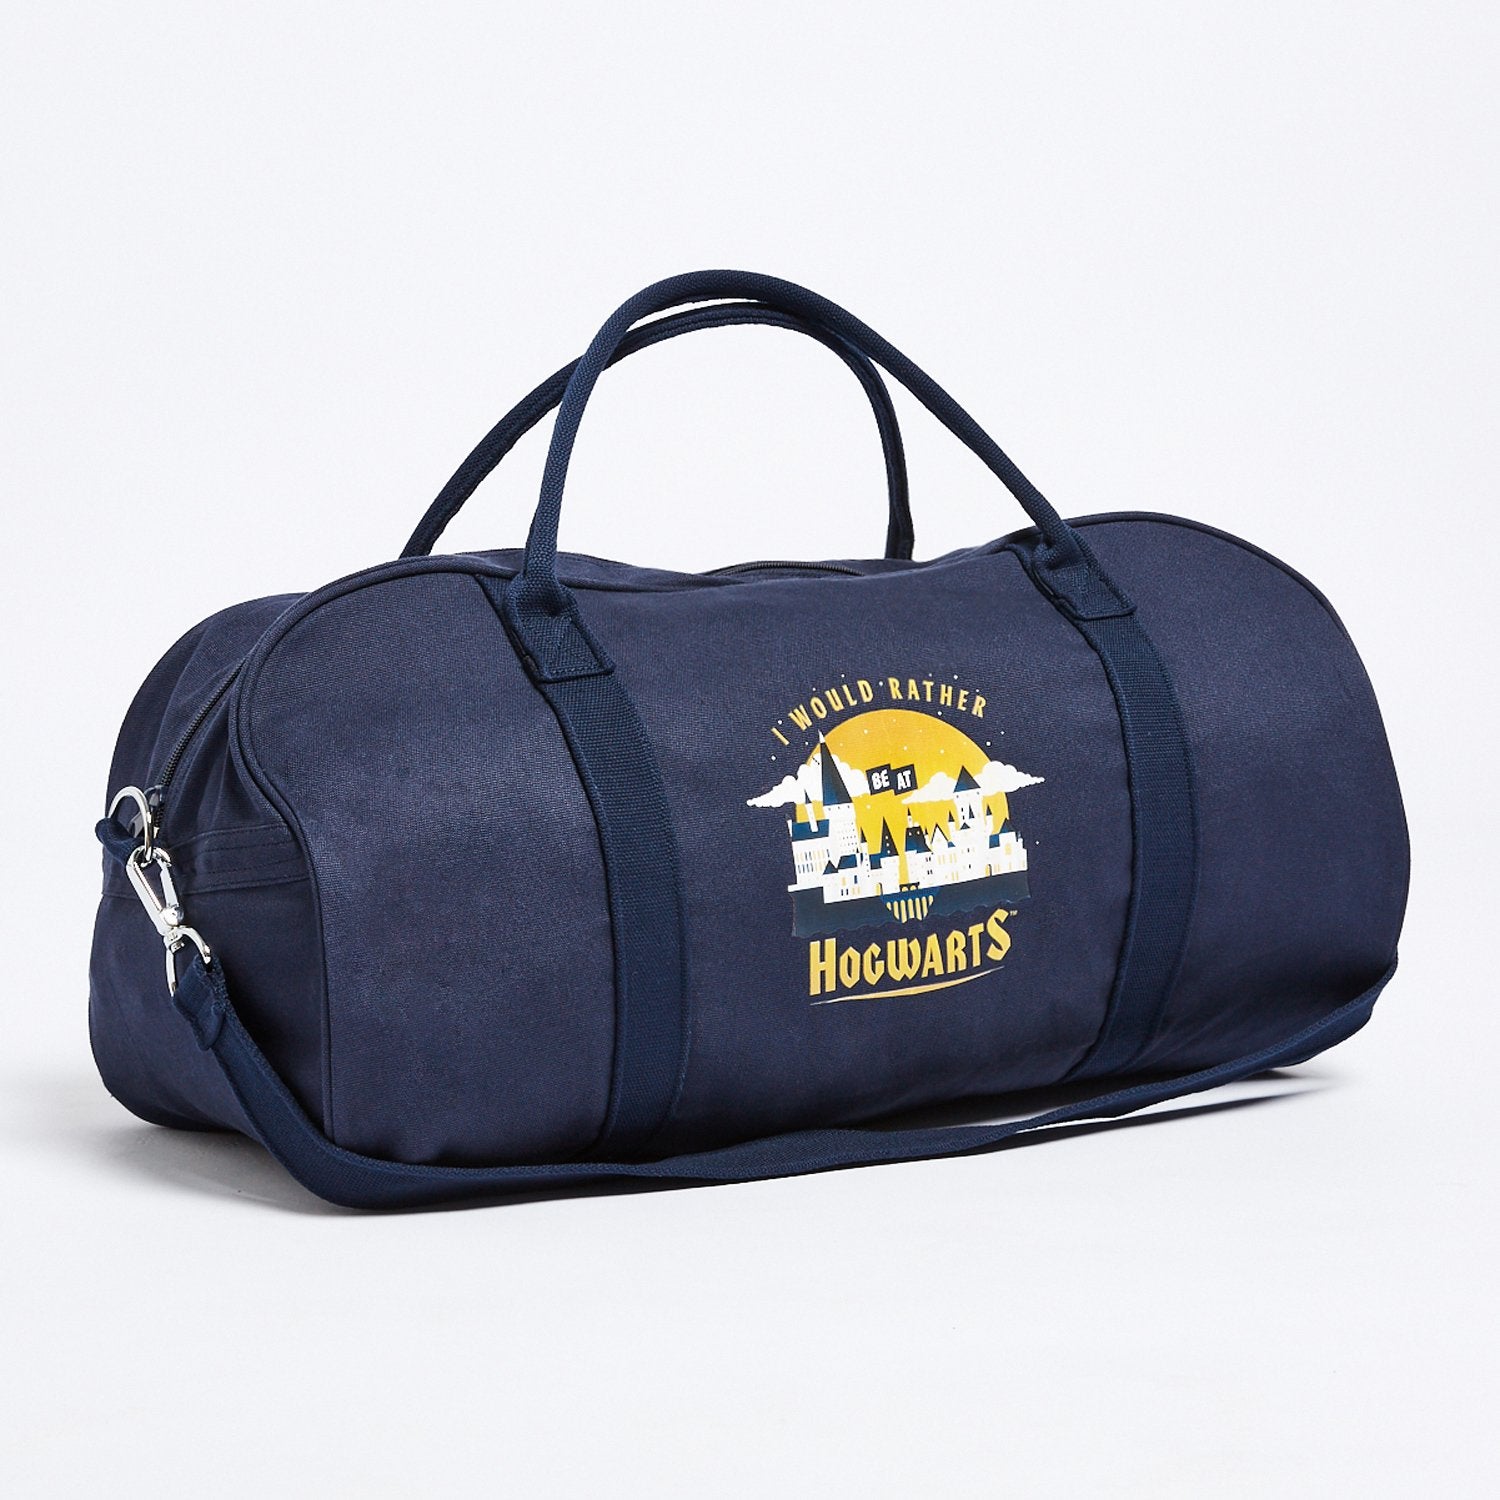 Hogwarts Overnight Tote Bags